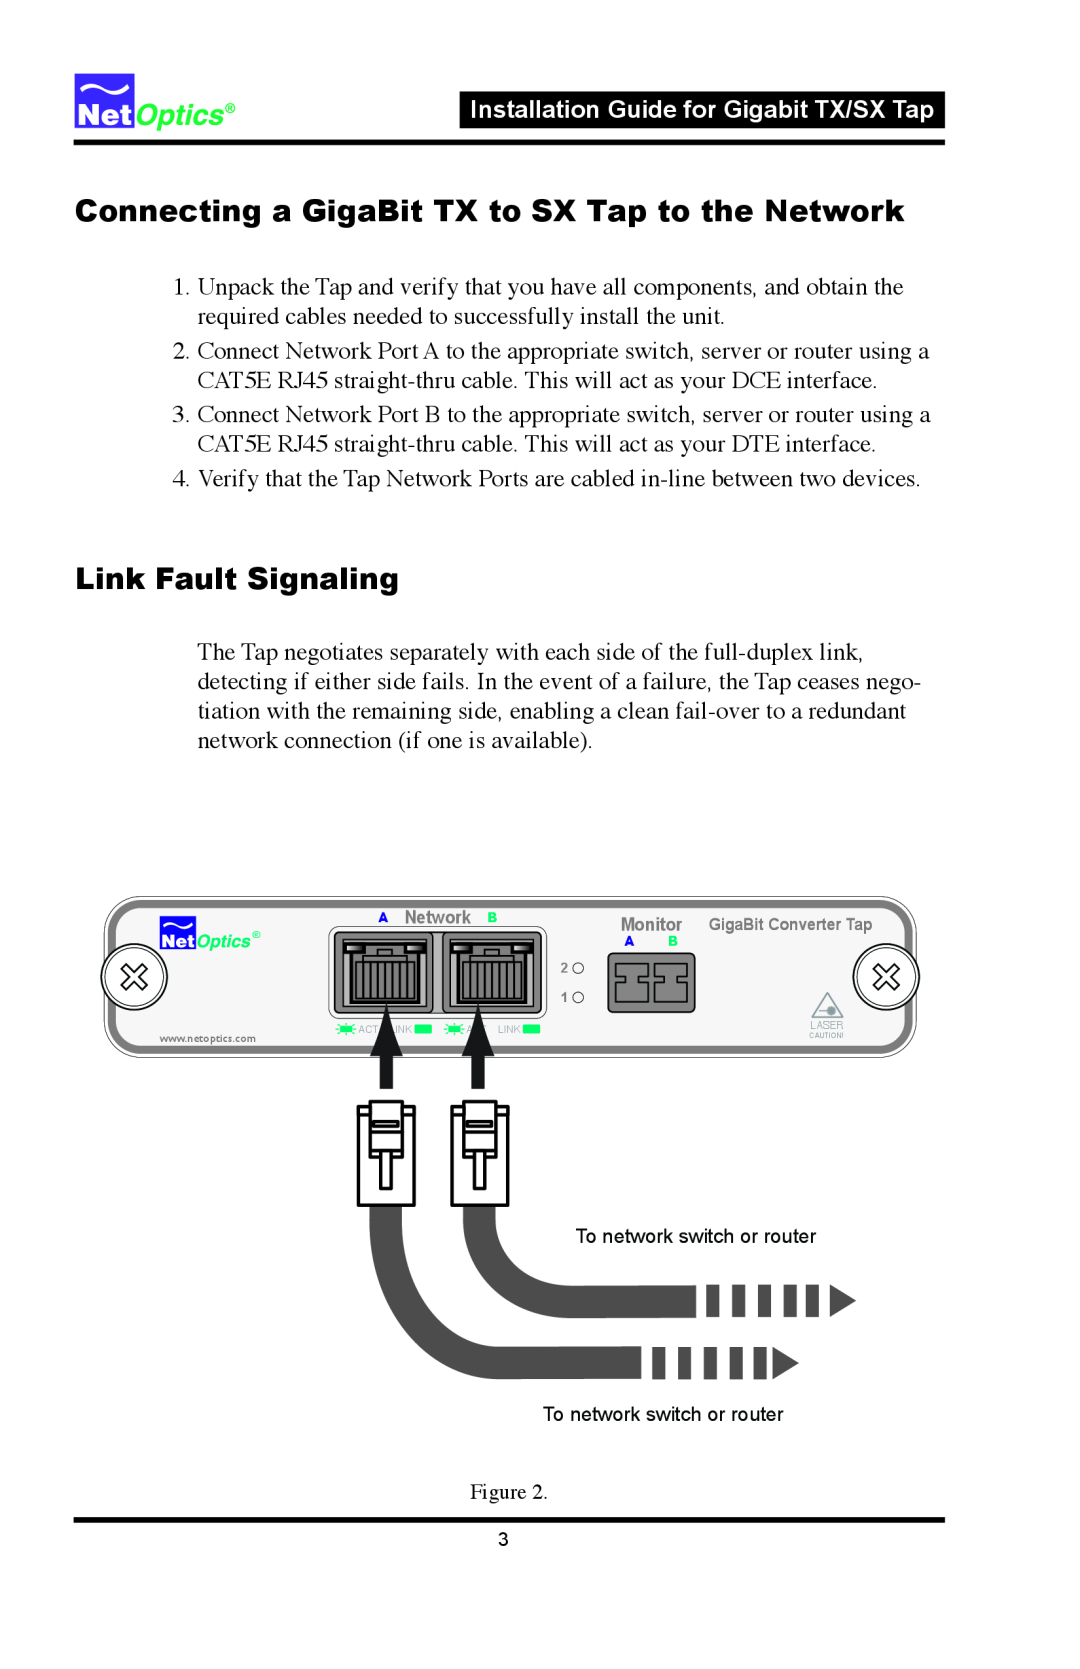 Nokia CVT-GCU/SX manual Connecting a GigaBit TX to SX Tap to the Network, Link Fault Signaling, To network switch or router 